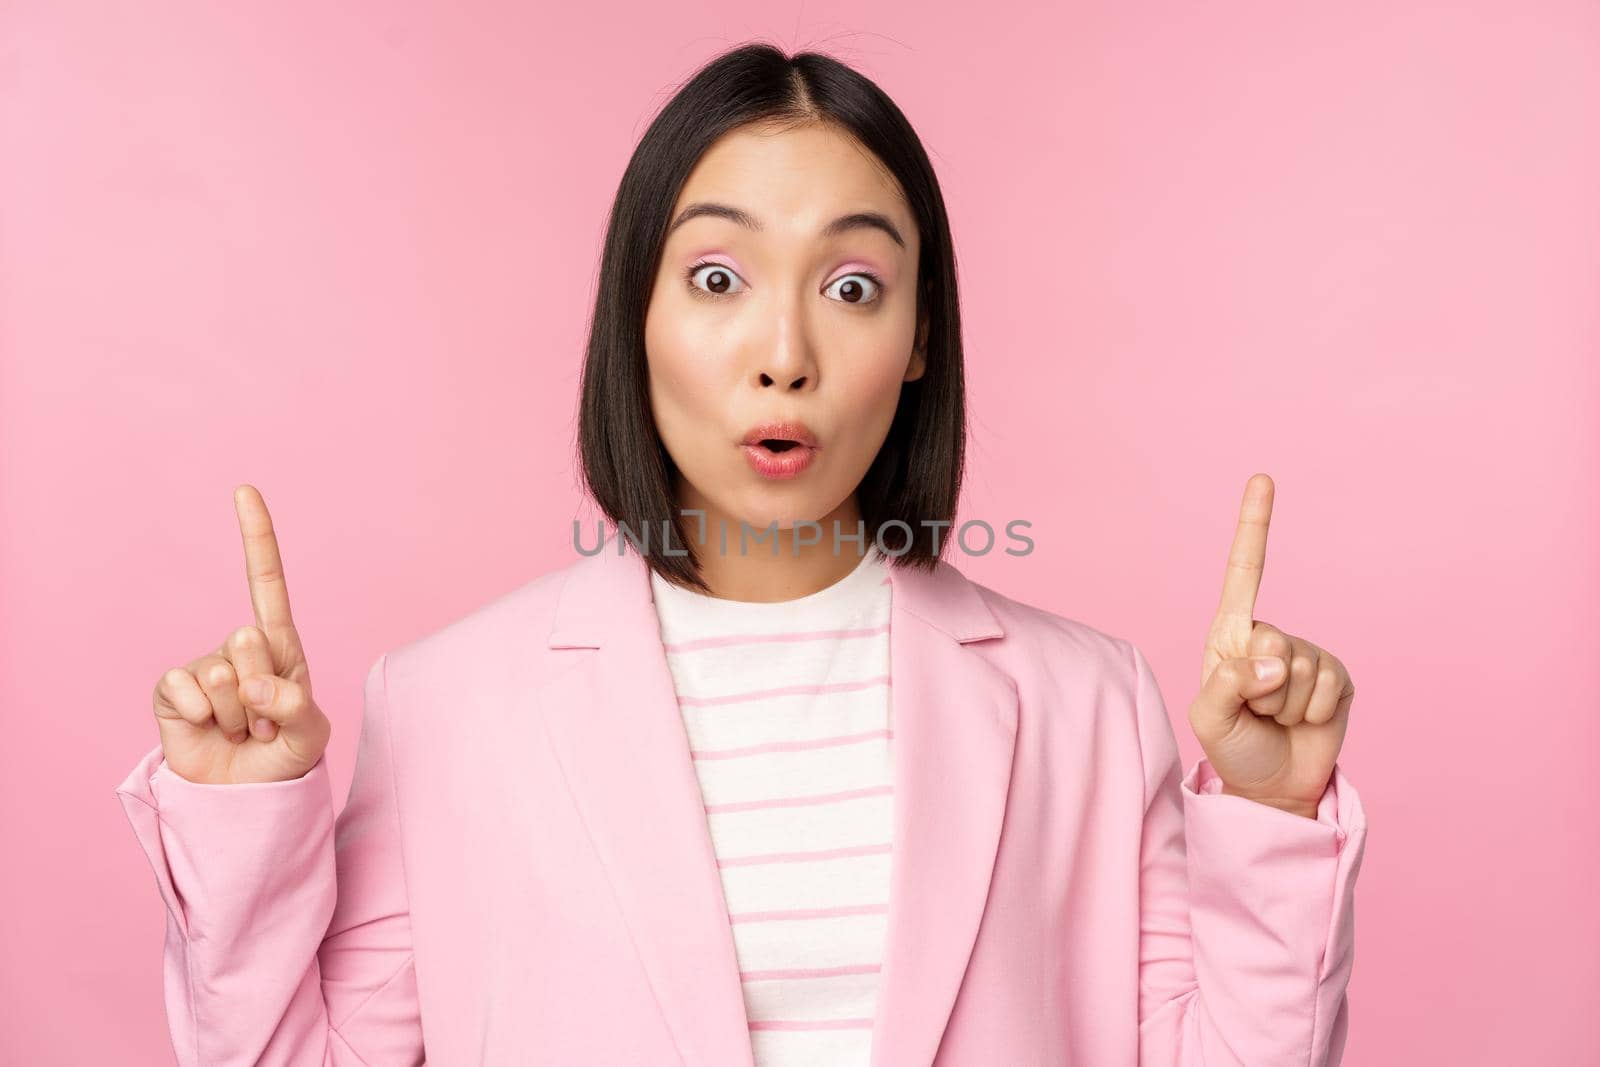 Portrait of asian businesswoman, corporate worker in suit, looks surprised by advertisement, points finger up, showing banner or logo on top, stands over pink background.